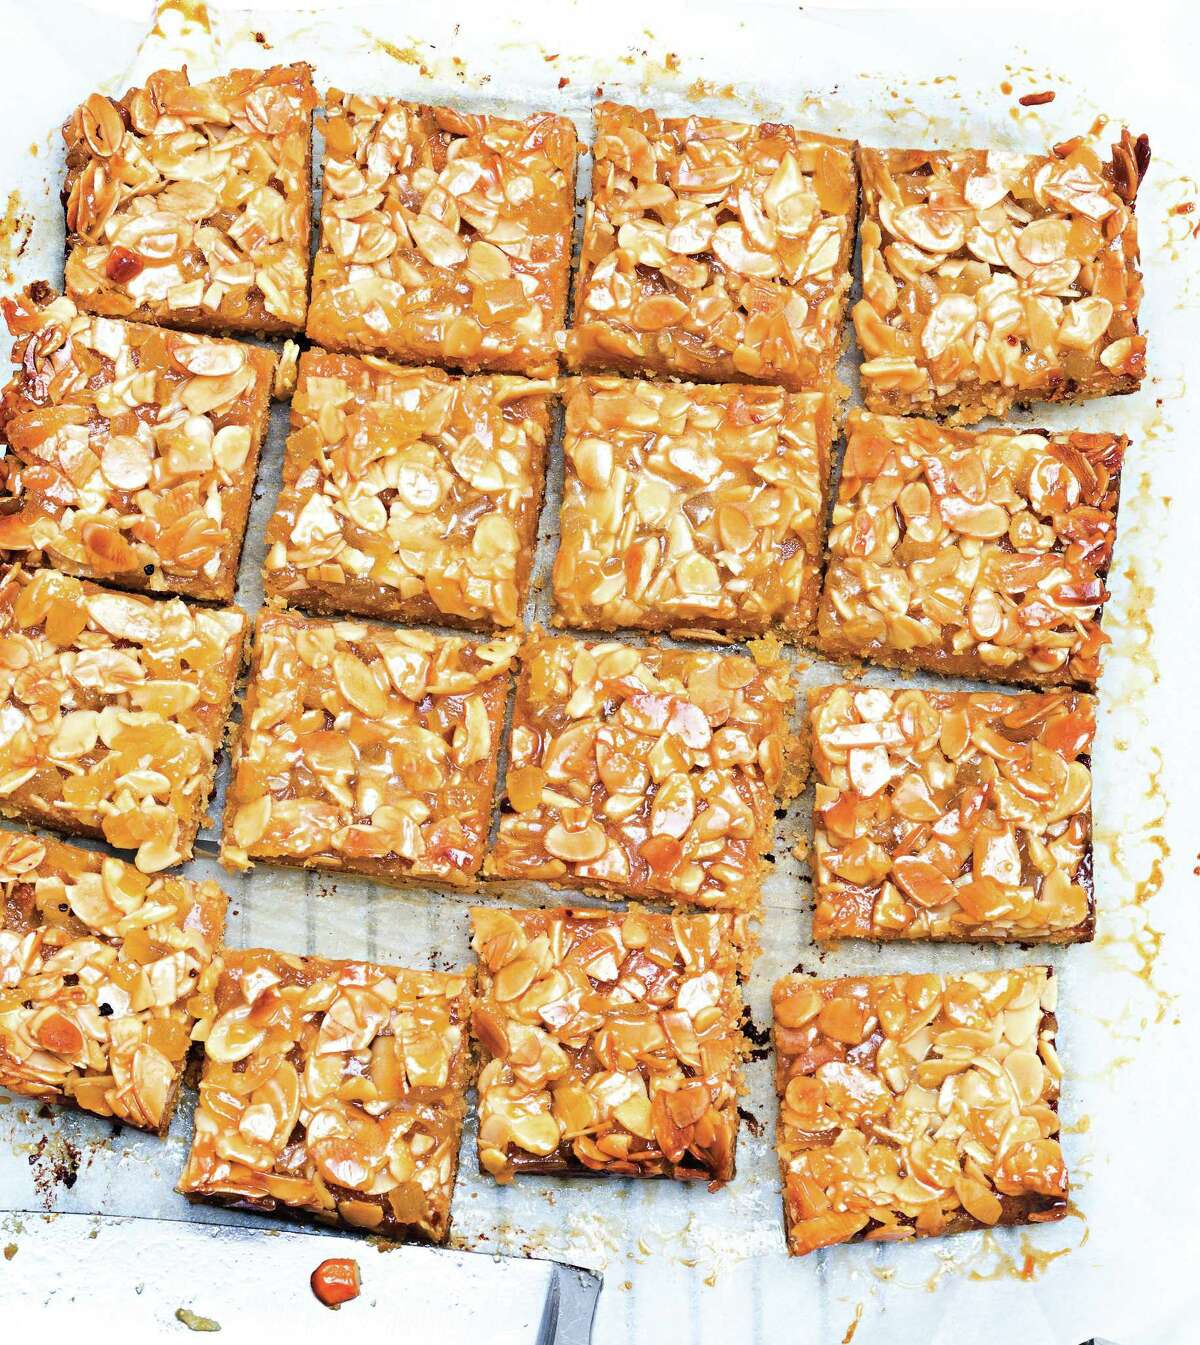 Ginger Almond Bars from author and teacher Patricia Wells demonstrate proper baking technique.